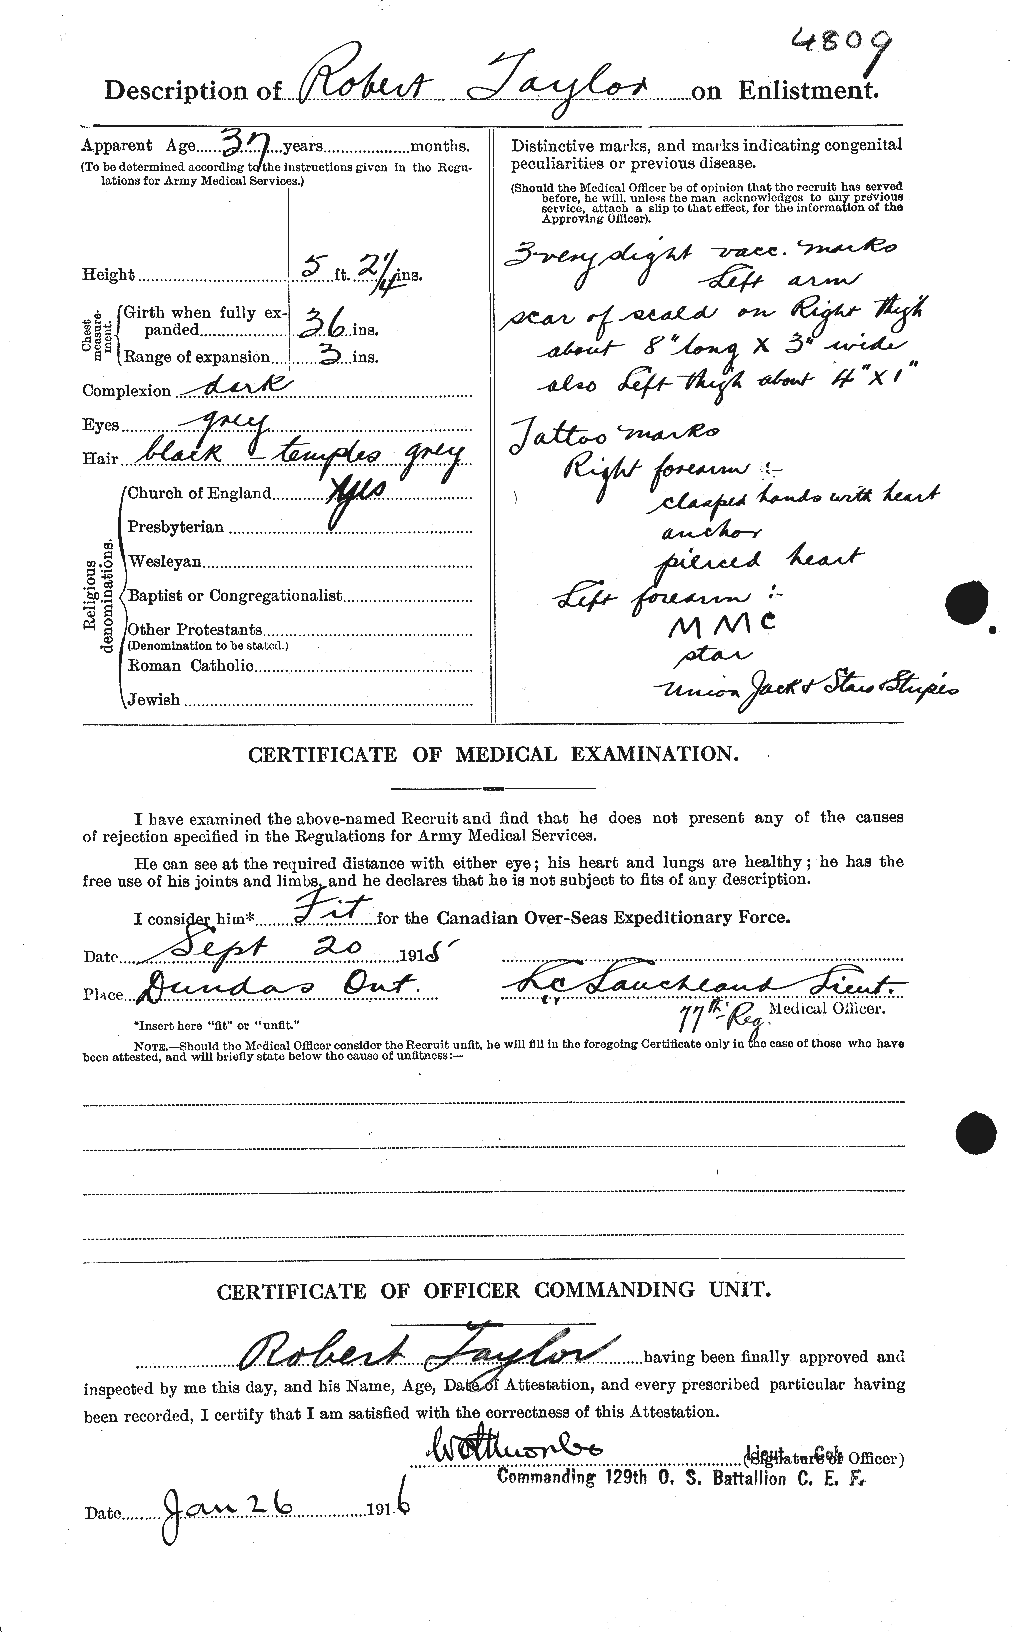 Personnel Records of the First World War - CEF 627428b